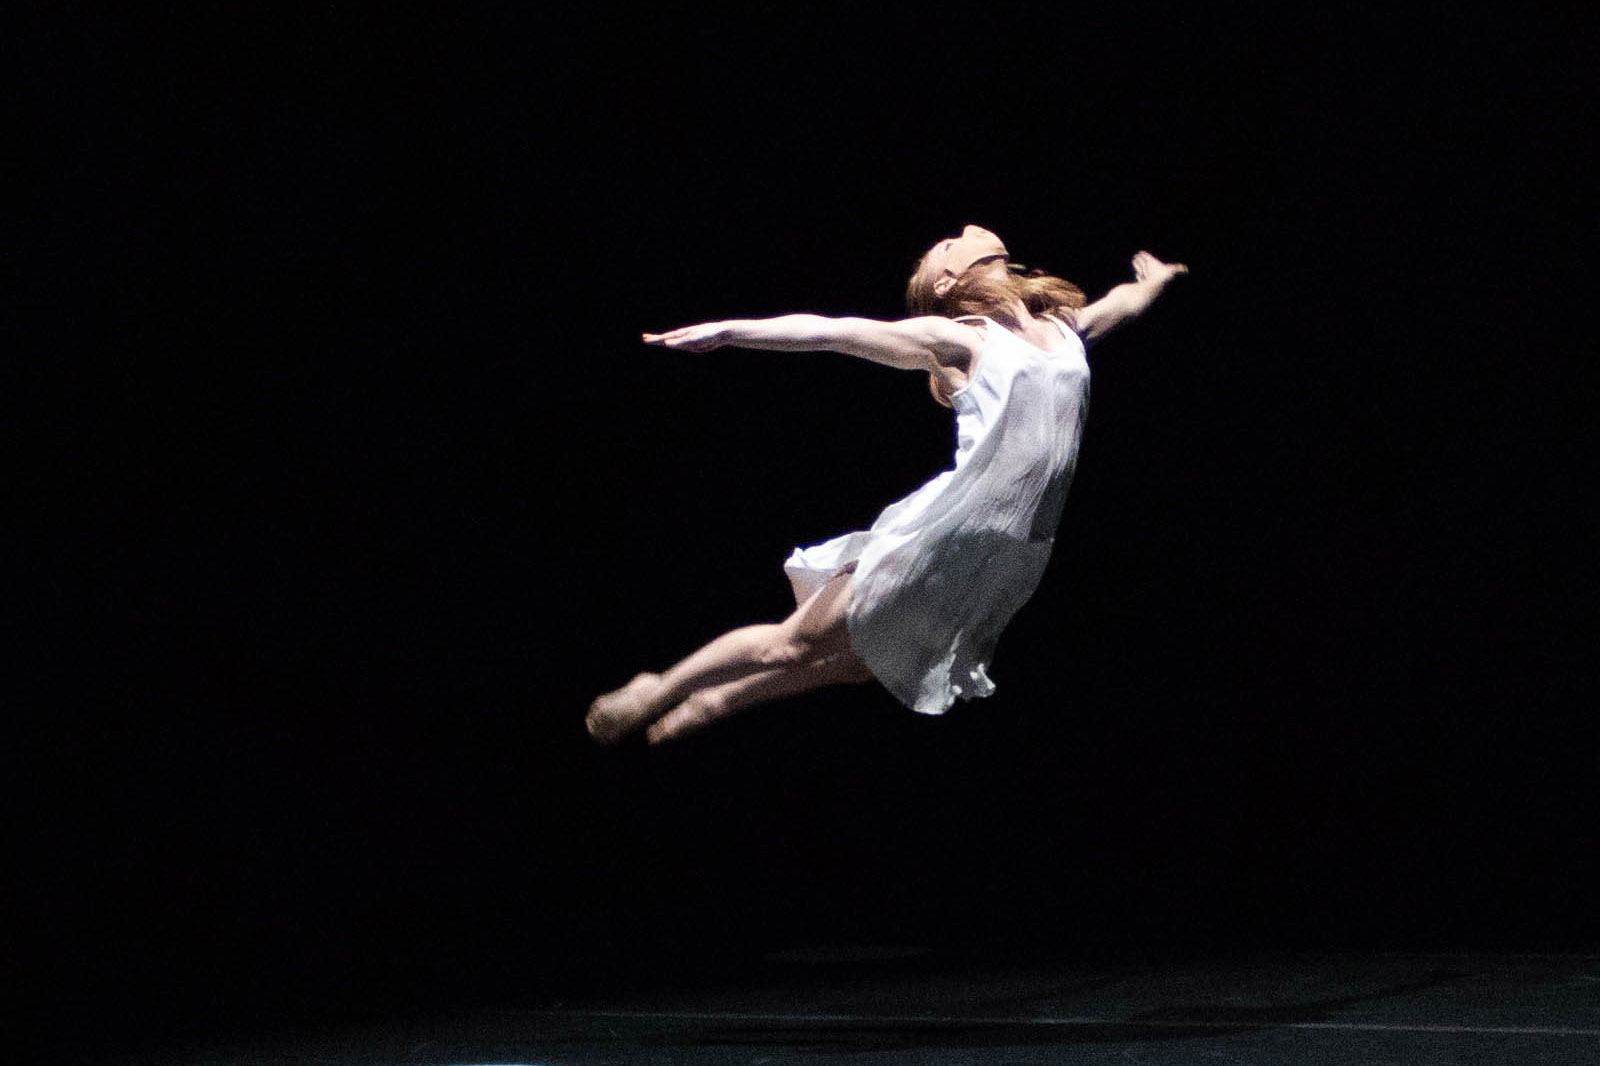 A solo University of Iowa dancer leaping on stage